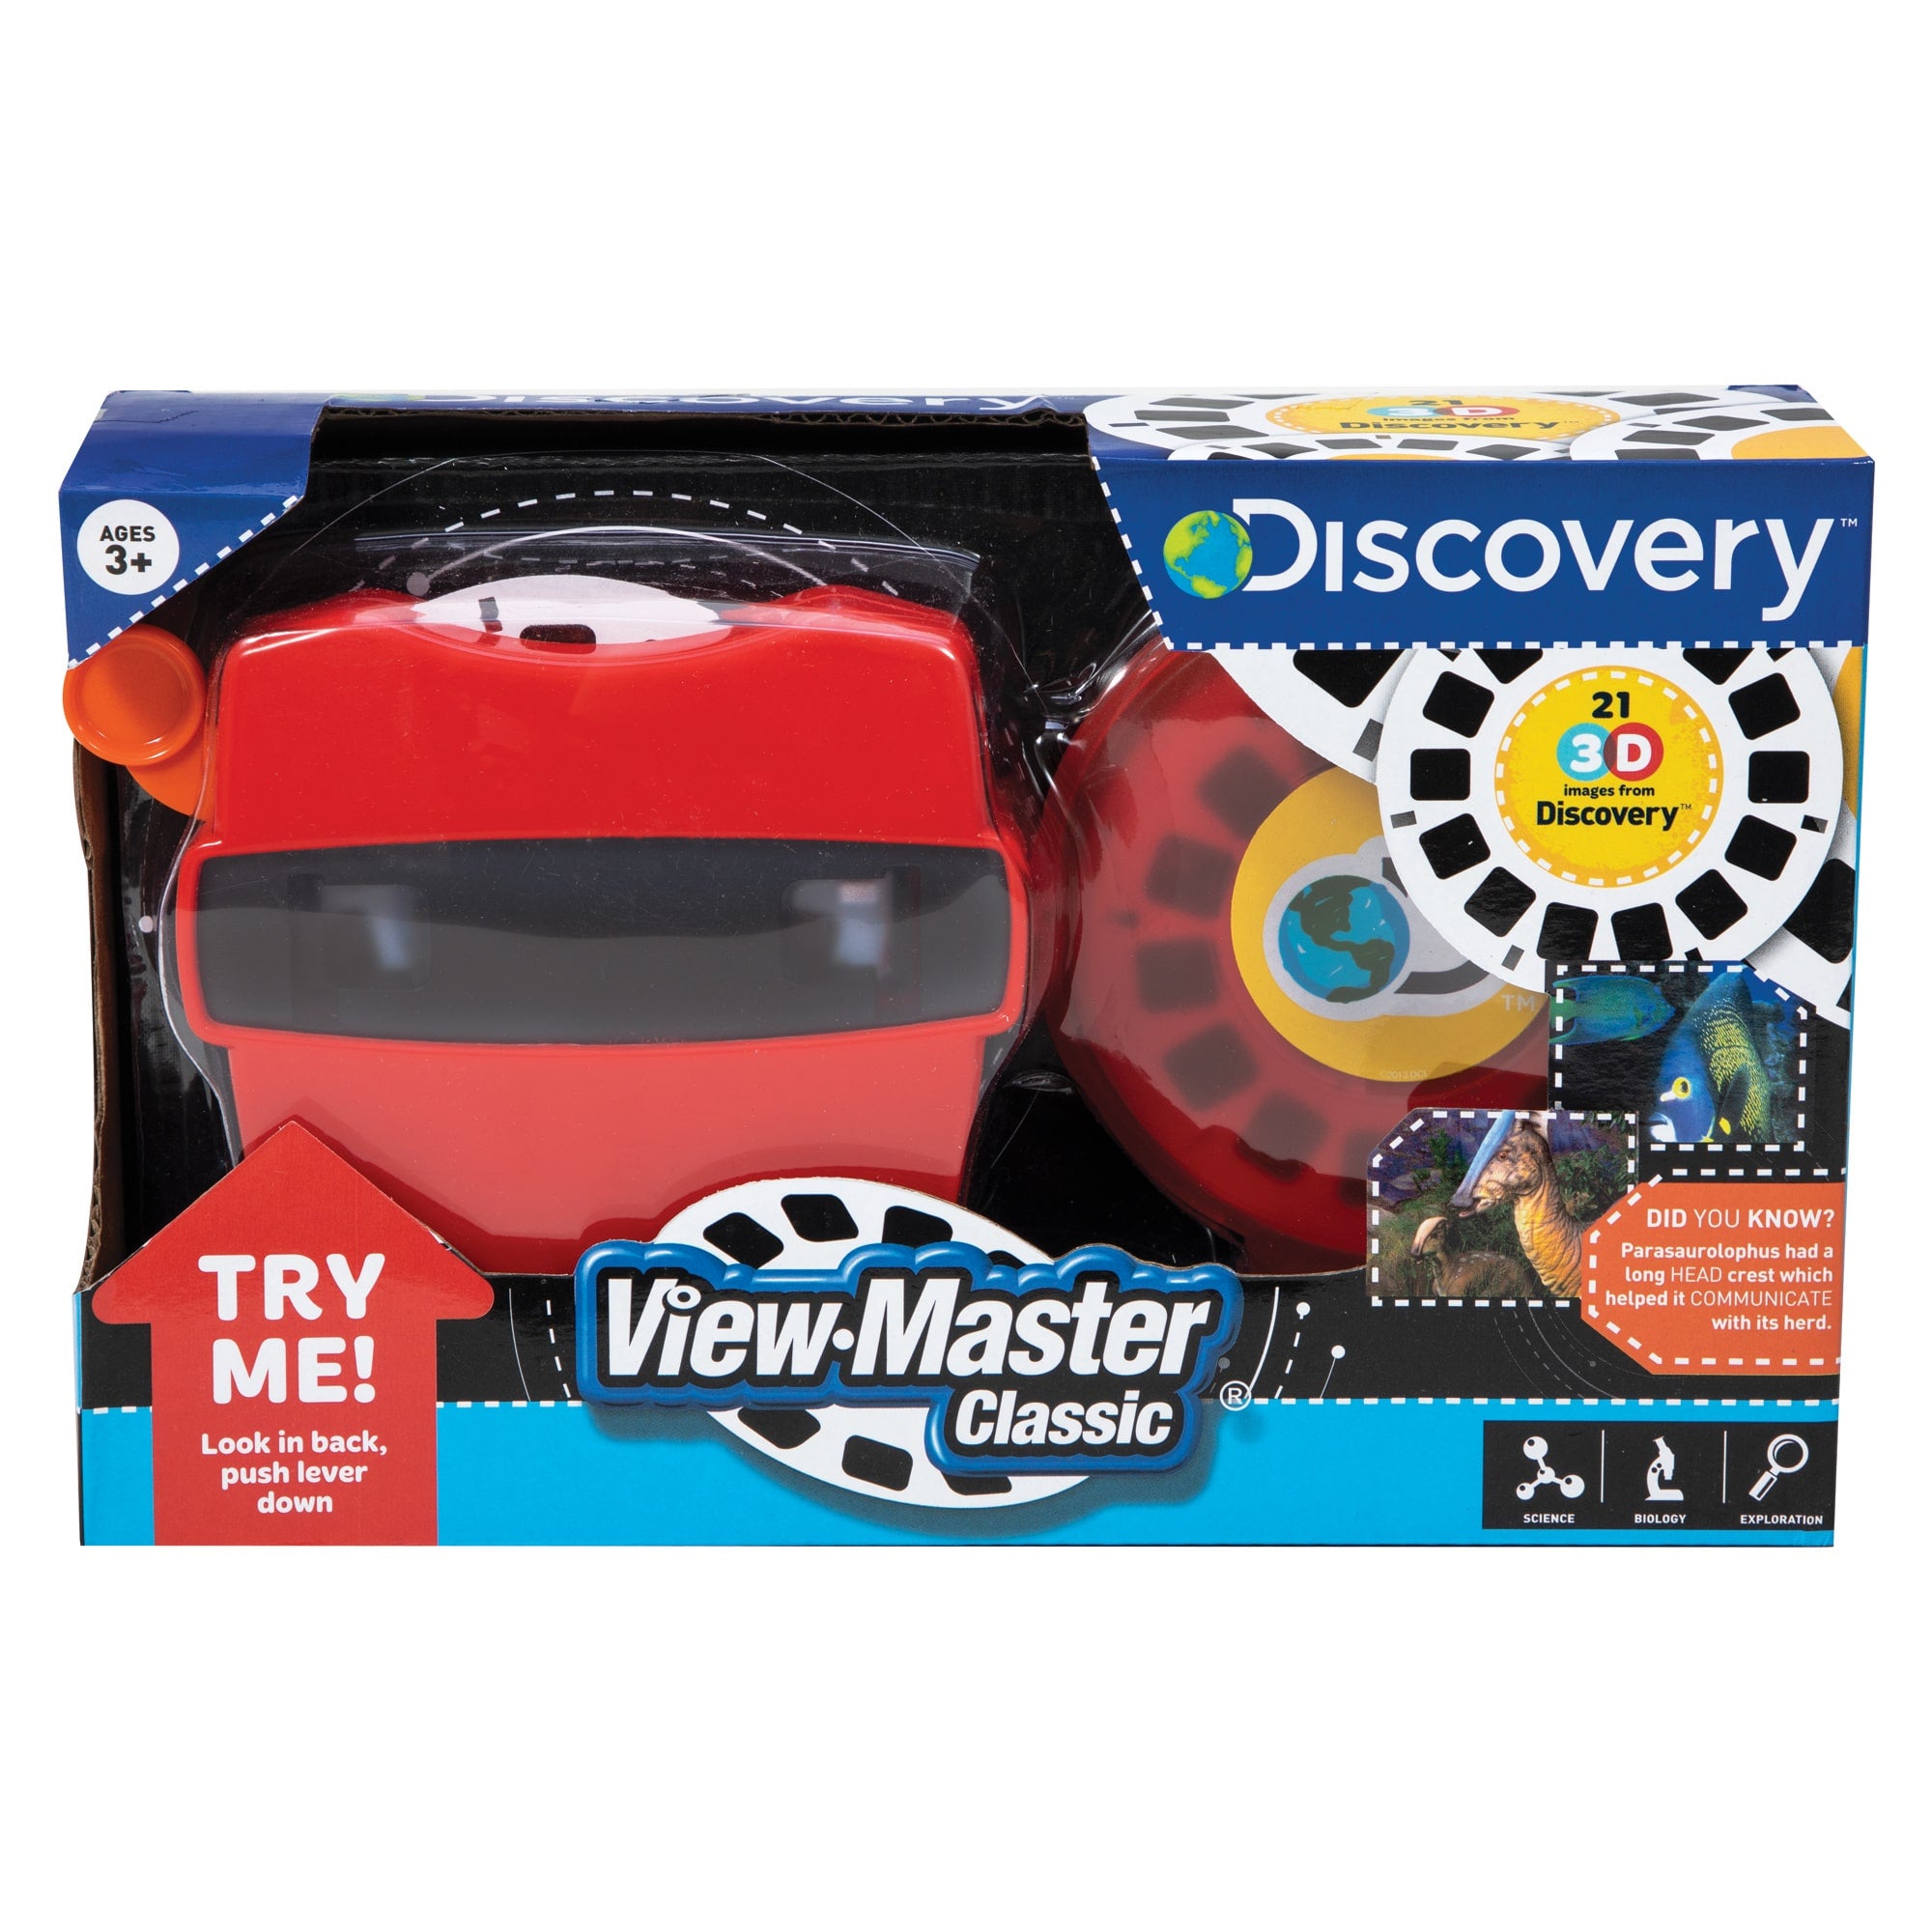 View-Master Classic by Schylling